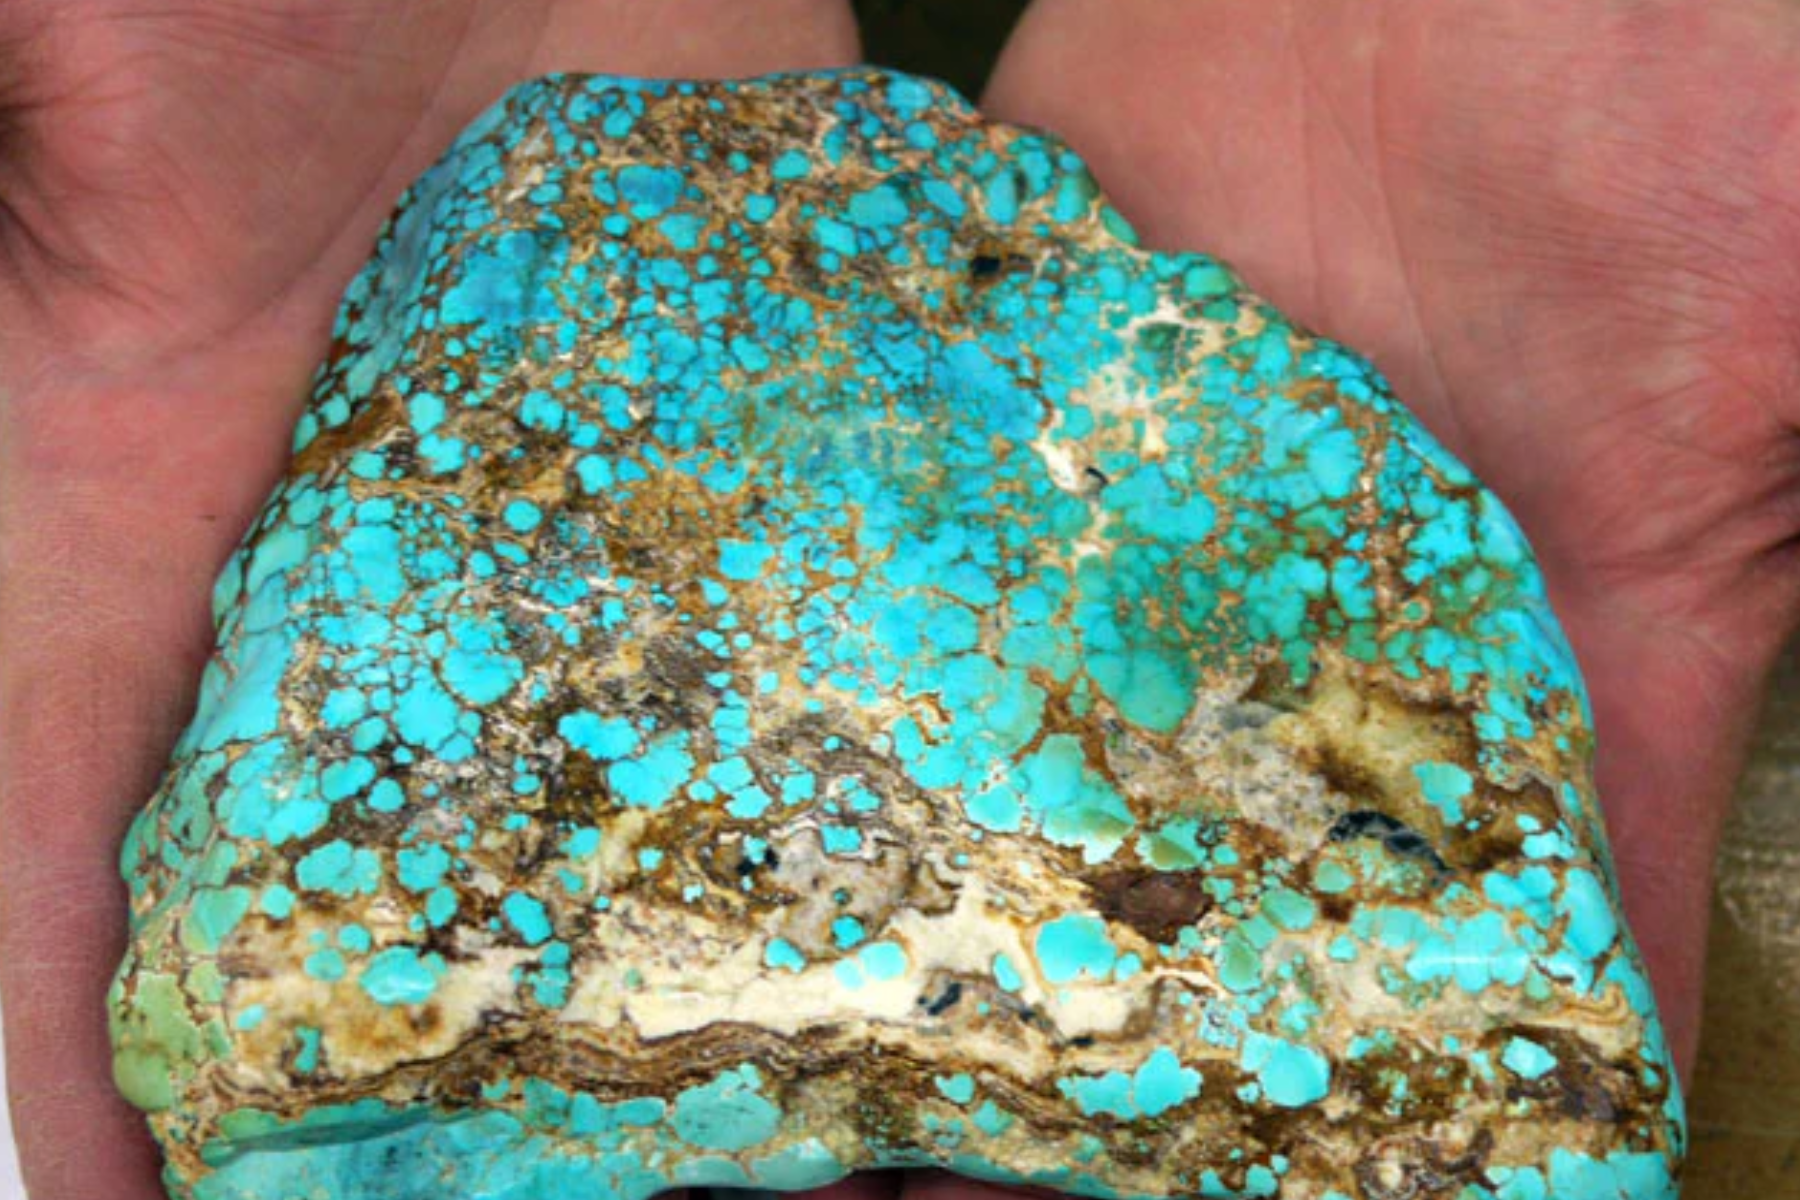 A hand holding a massive American turquoise stone